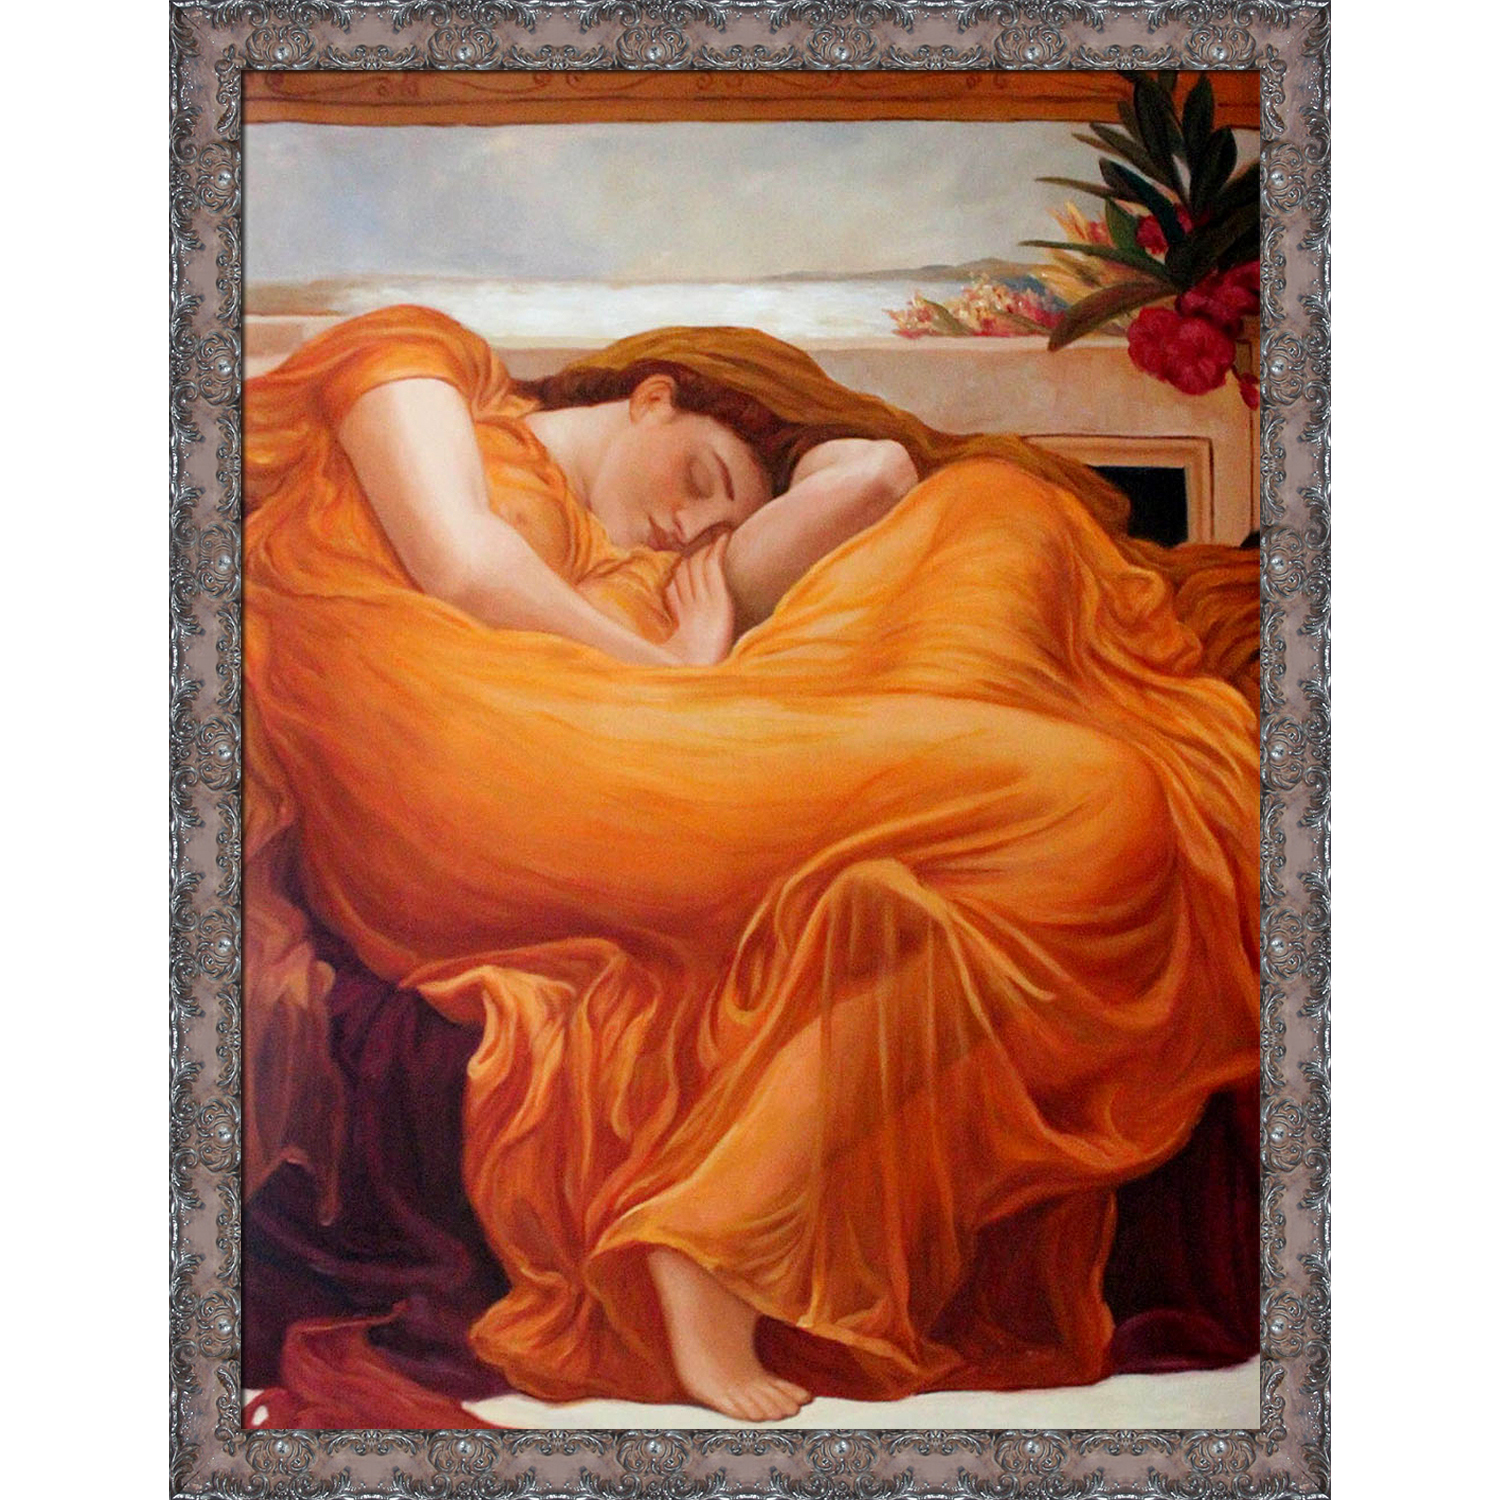 In San Francisco, Frederic Leighton’s ‘Flaming June’ is a best-seller on overstockArt.com.